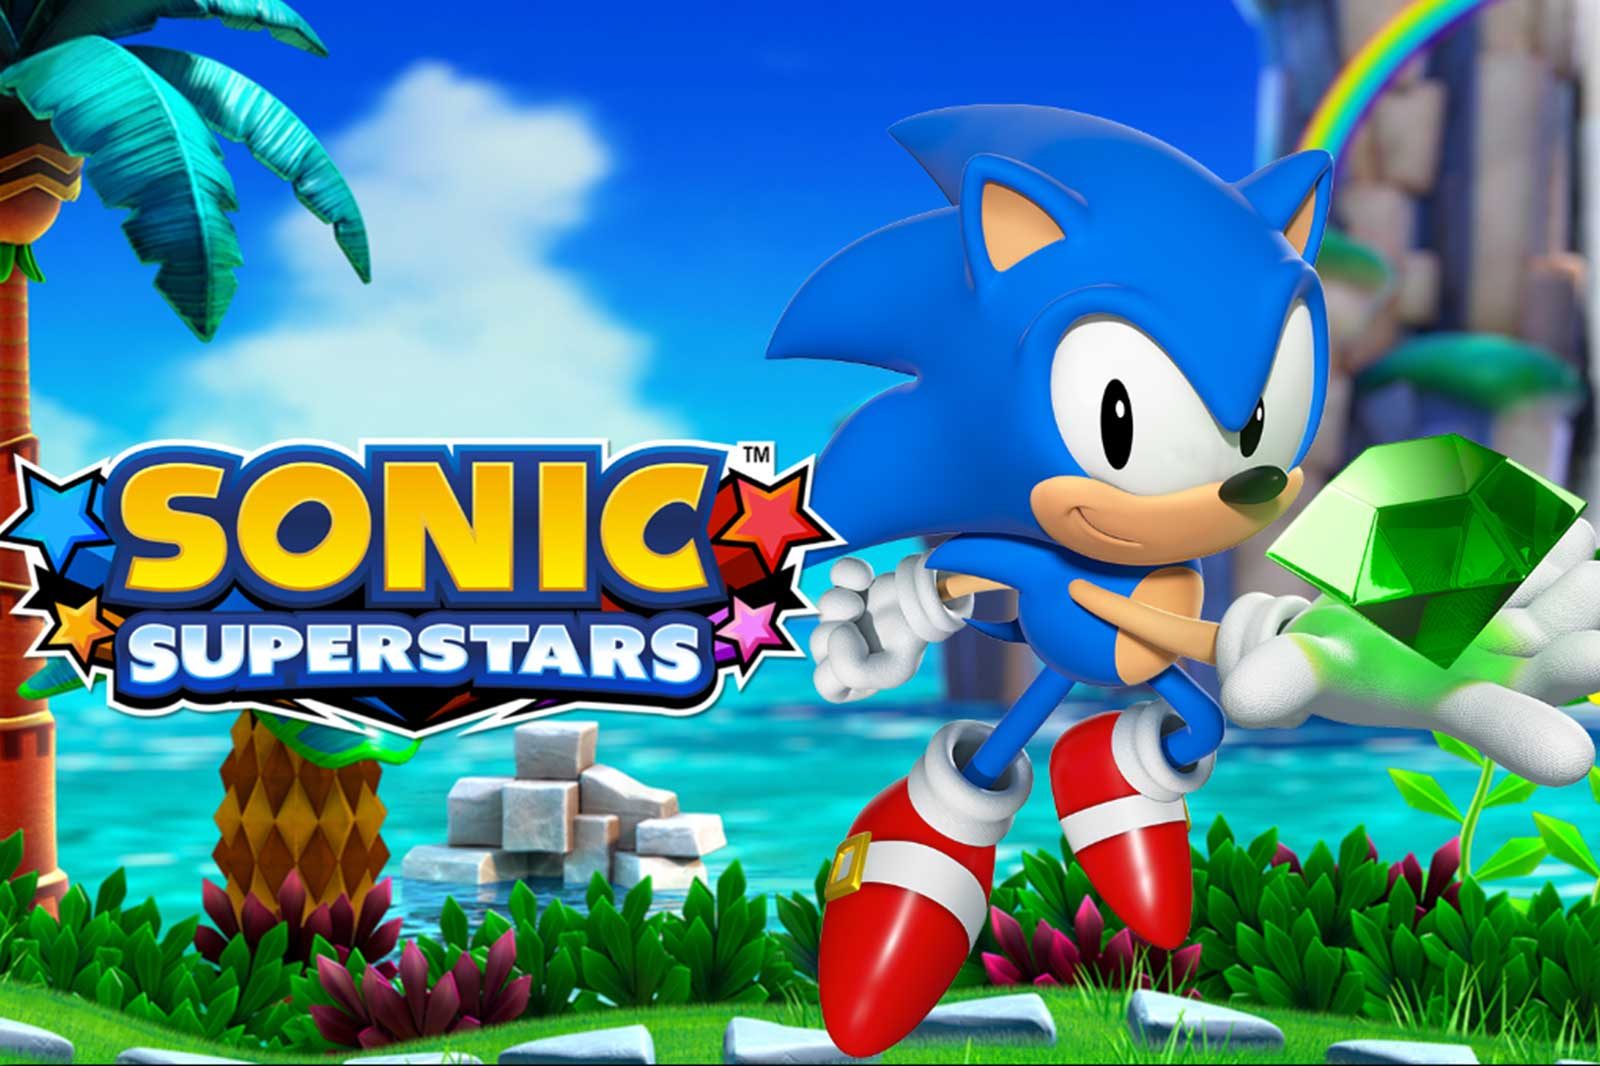 Sonic Superstars has been released on PlayStation 4, PlayStation 5, Xbox One, Xbox Series, Nintendo Switch and PC